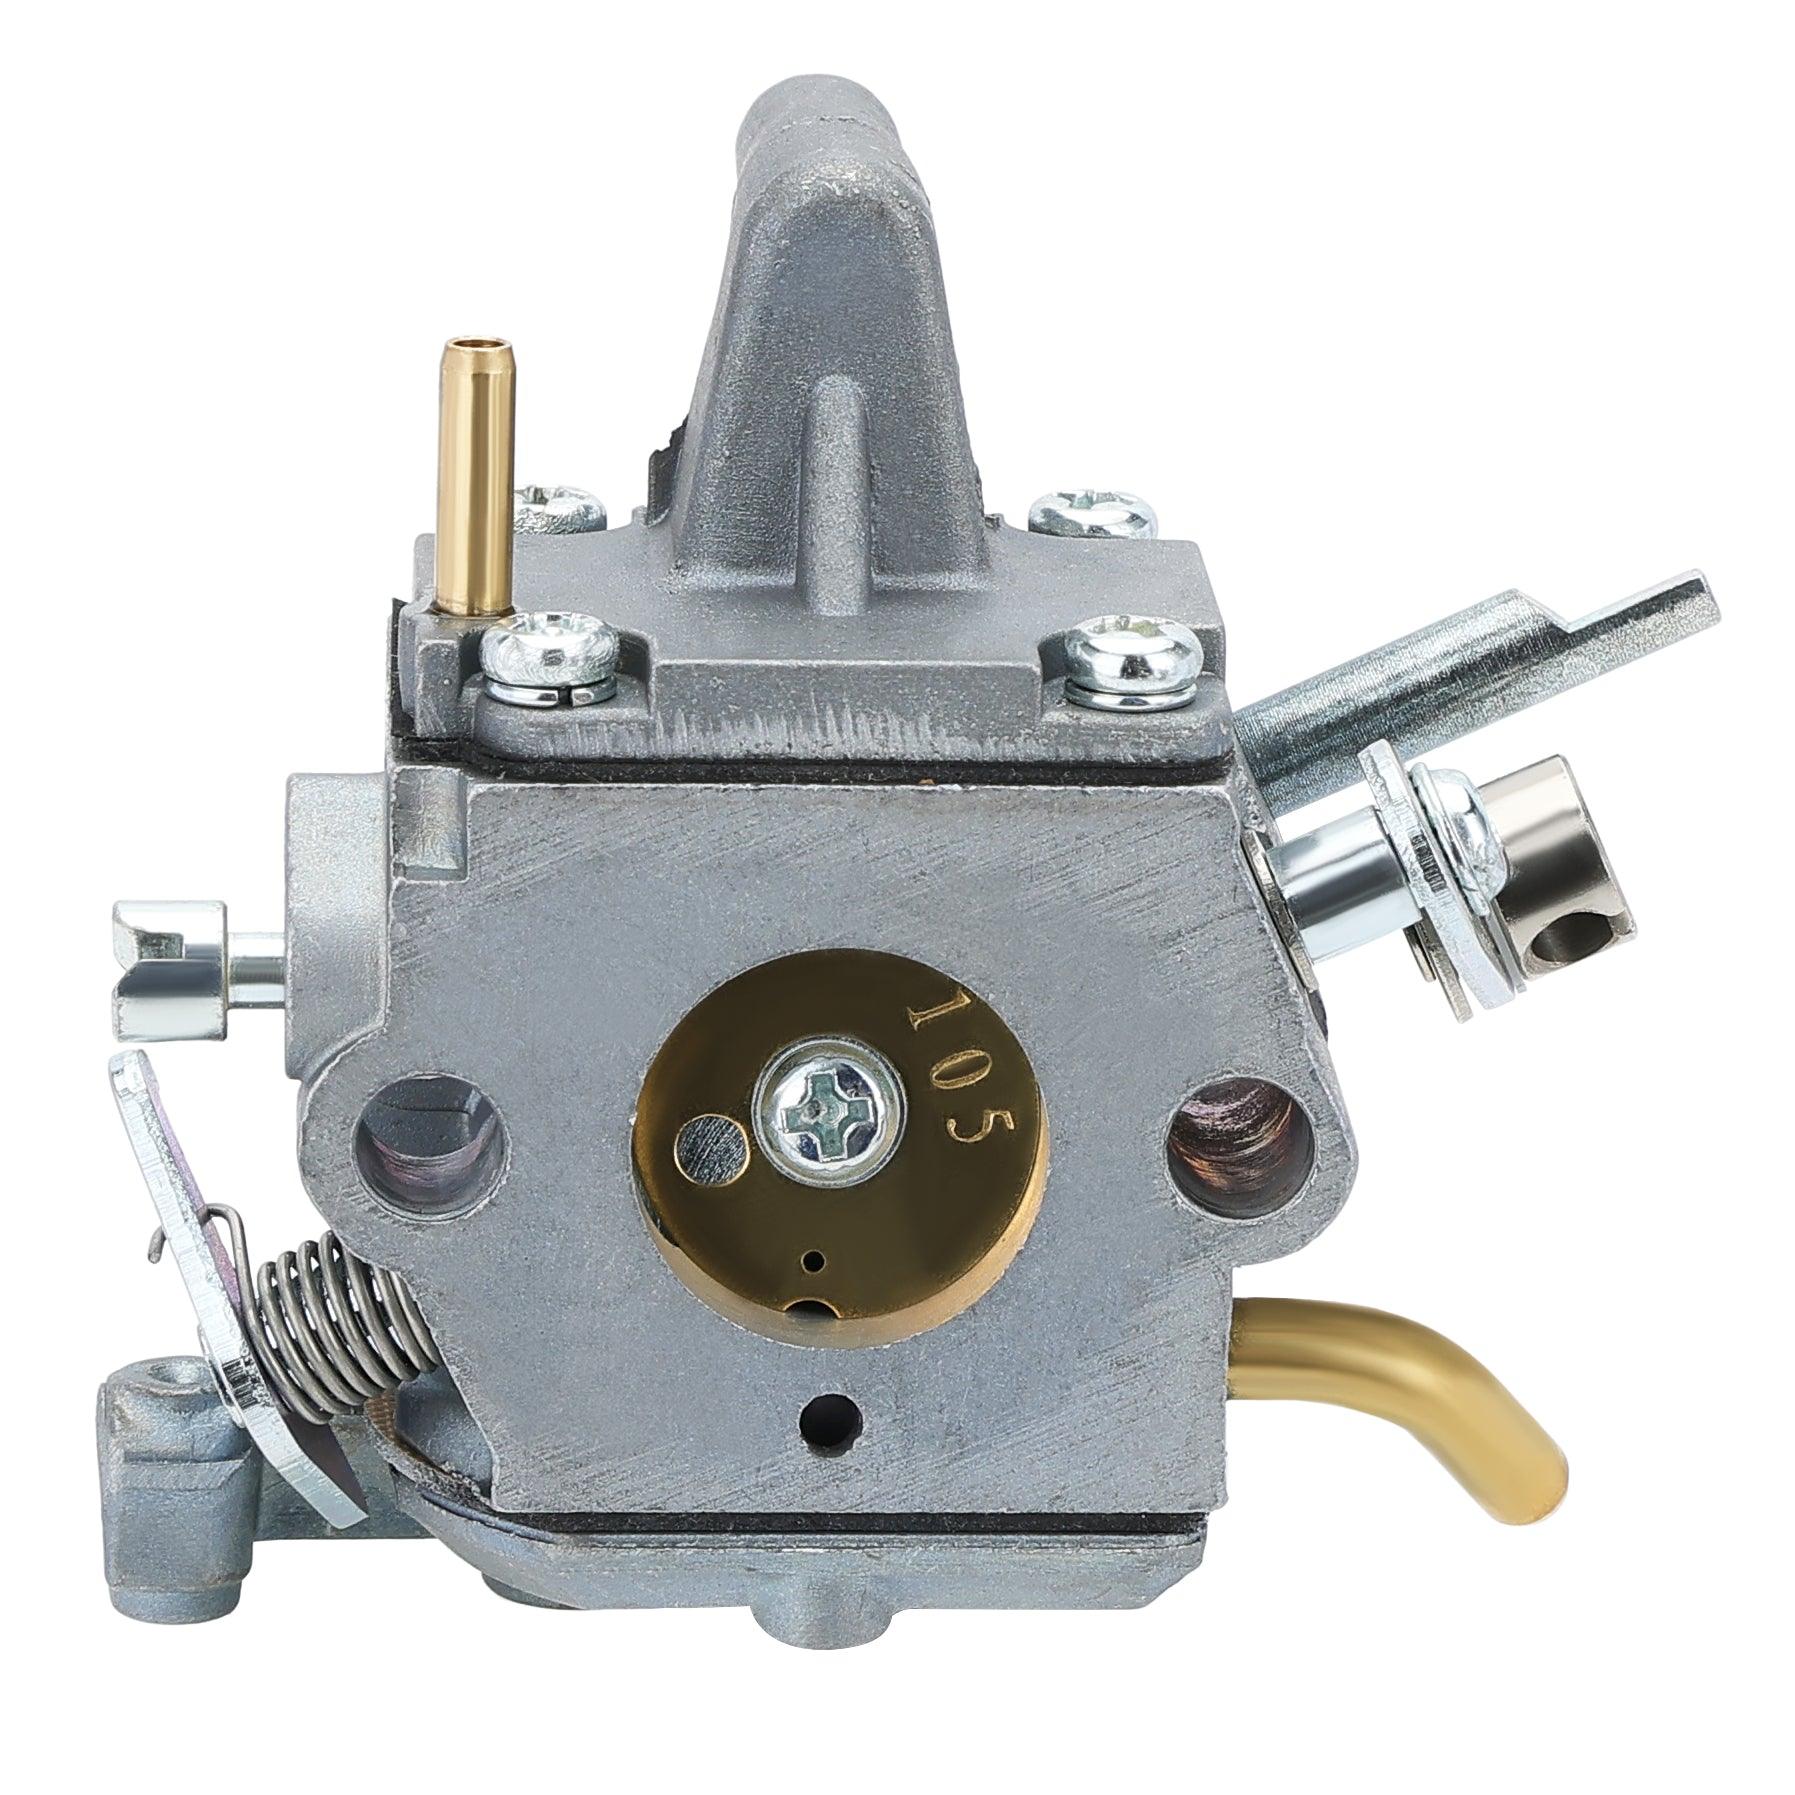 Hipa GA2662A Carburetor Compatible with Stihl FS400 FS450 FS480 Clearing Saws FR350 FR450 FR480 Backpack Brushcutter String Trimmers Similar to Zama C1Q-S34H 4128 120 0651